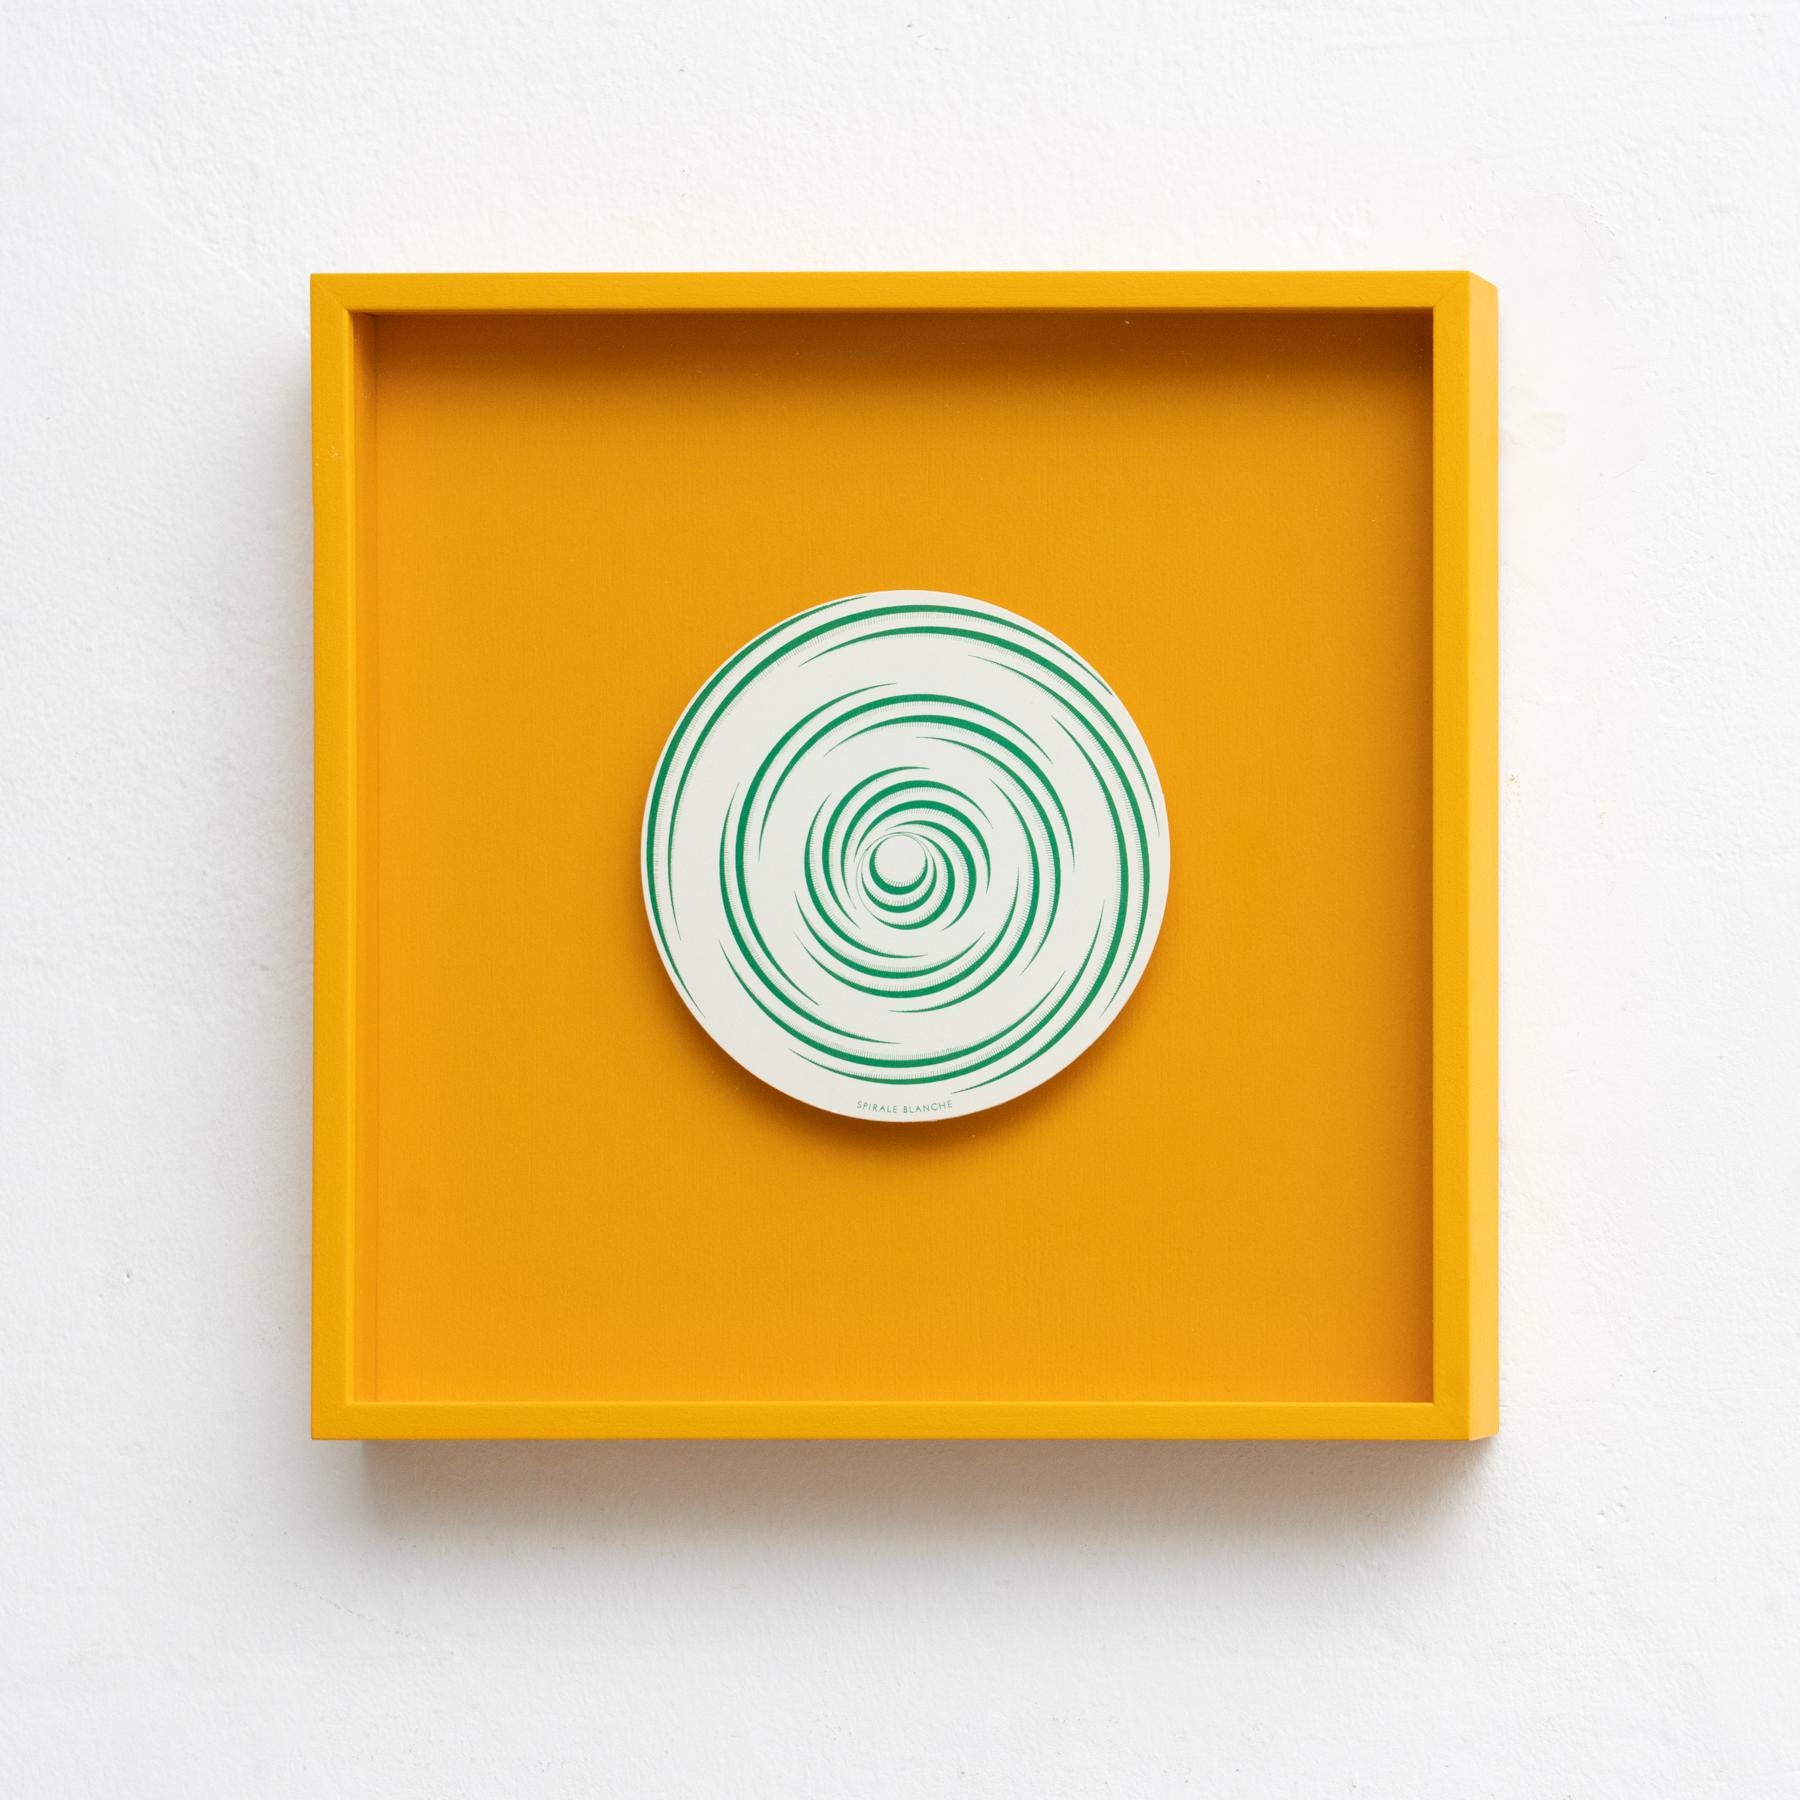 French Marcel Duchamp Spirale Blanche Rotorelief Framed in Yellow, 1987 For Sale